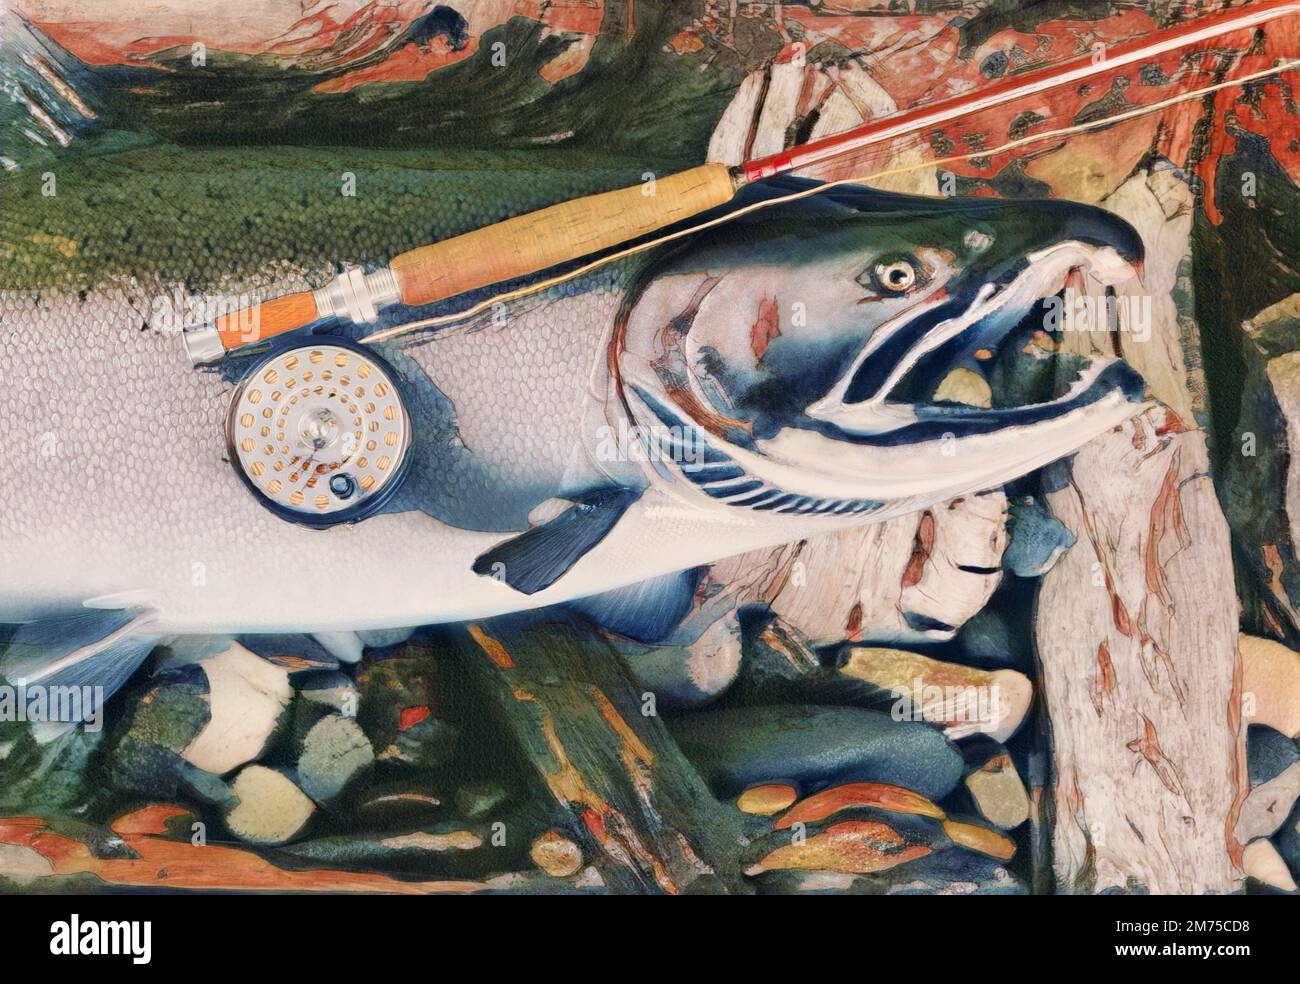 Digital watercolor painting effect on photo of antique fly rod and reel on large trout with stones and drift wood in background. Stock Photo